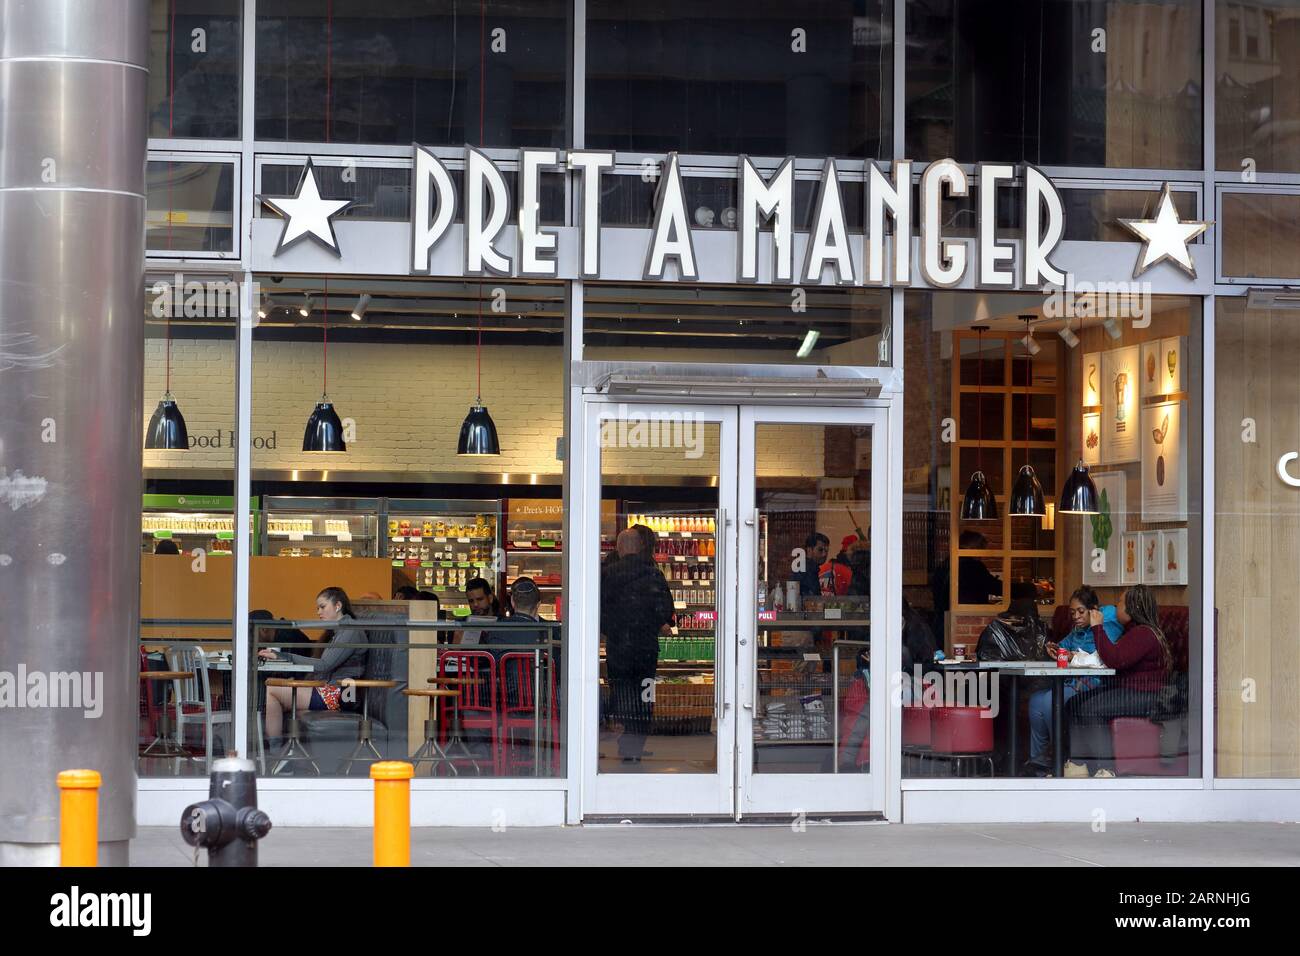 Pret A Manger, 750 8th Ave, New York, NY. exterior storefront of a sandwich shop chain near Times Square in Manhattan. Stock Photo